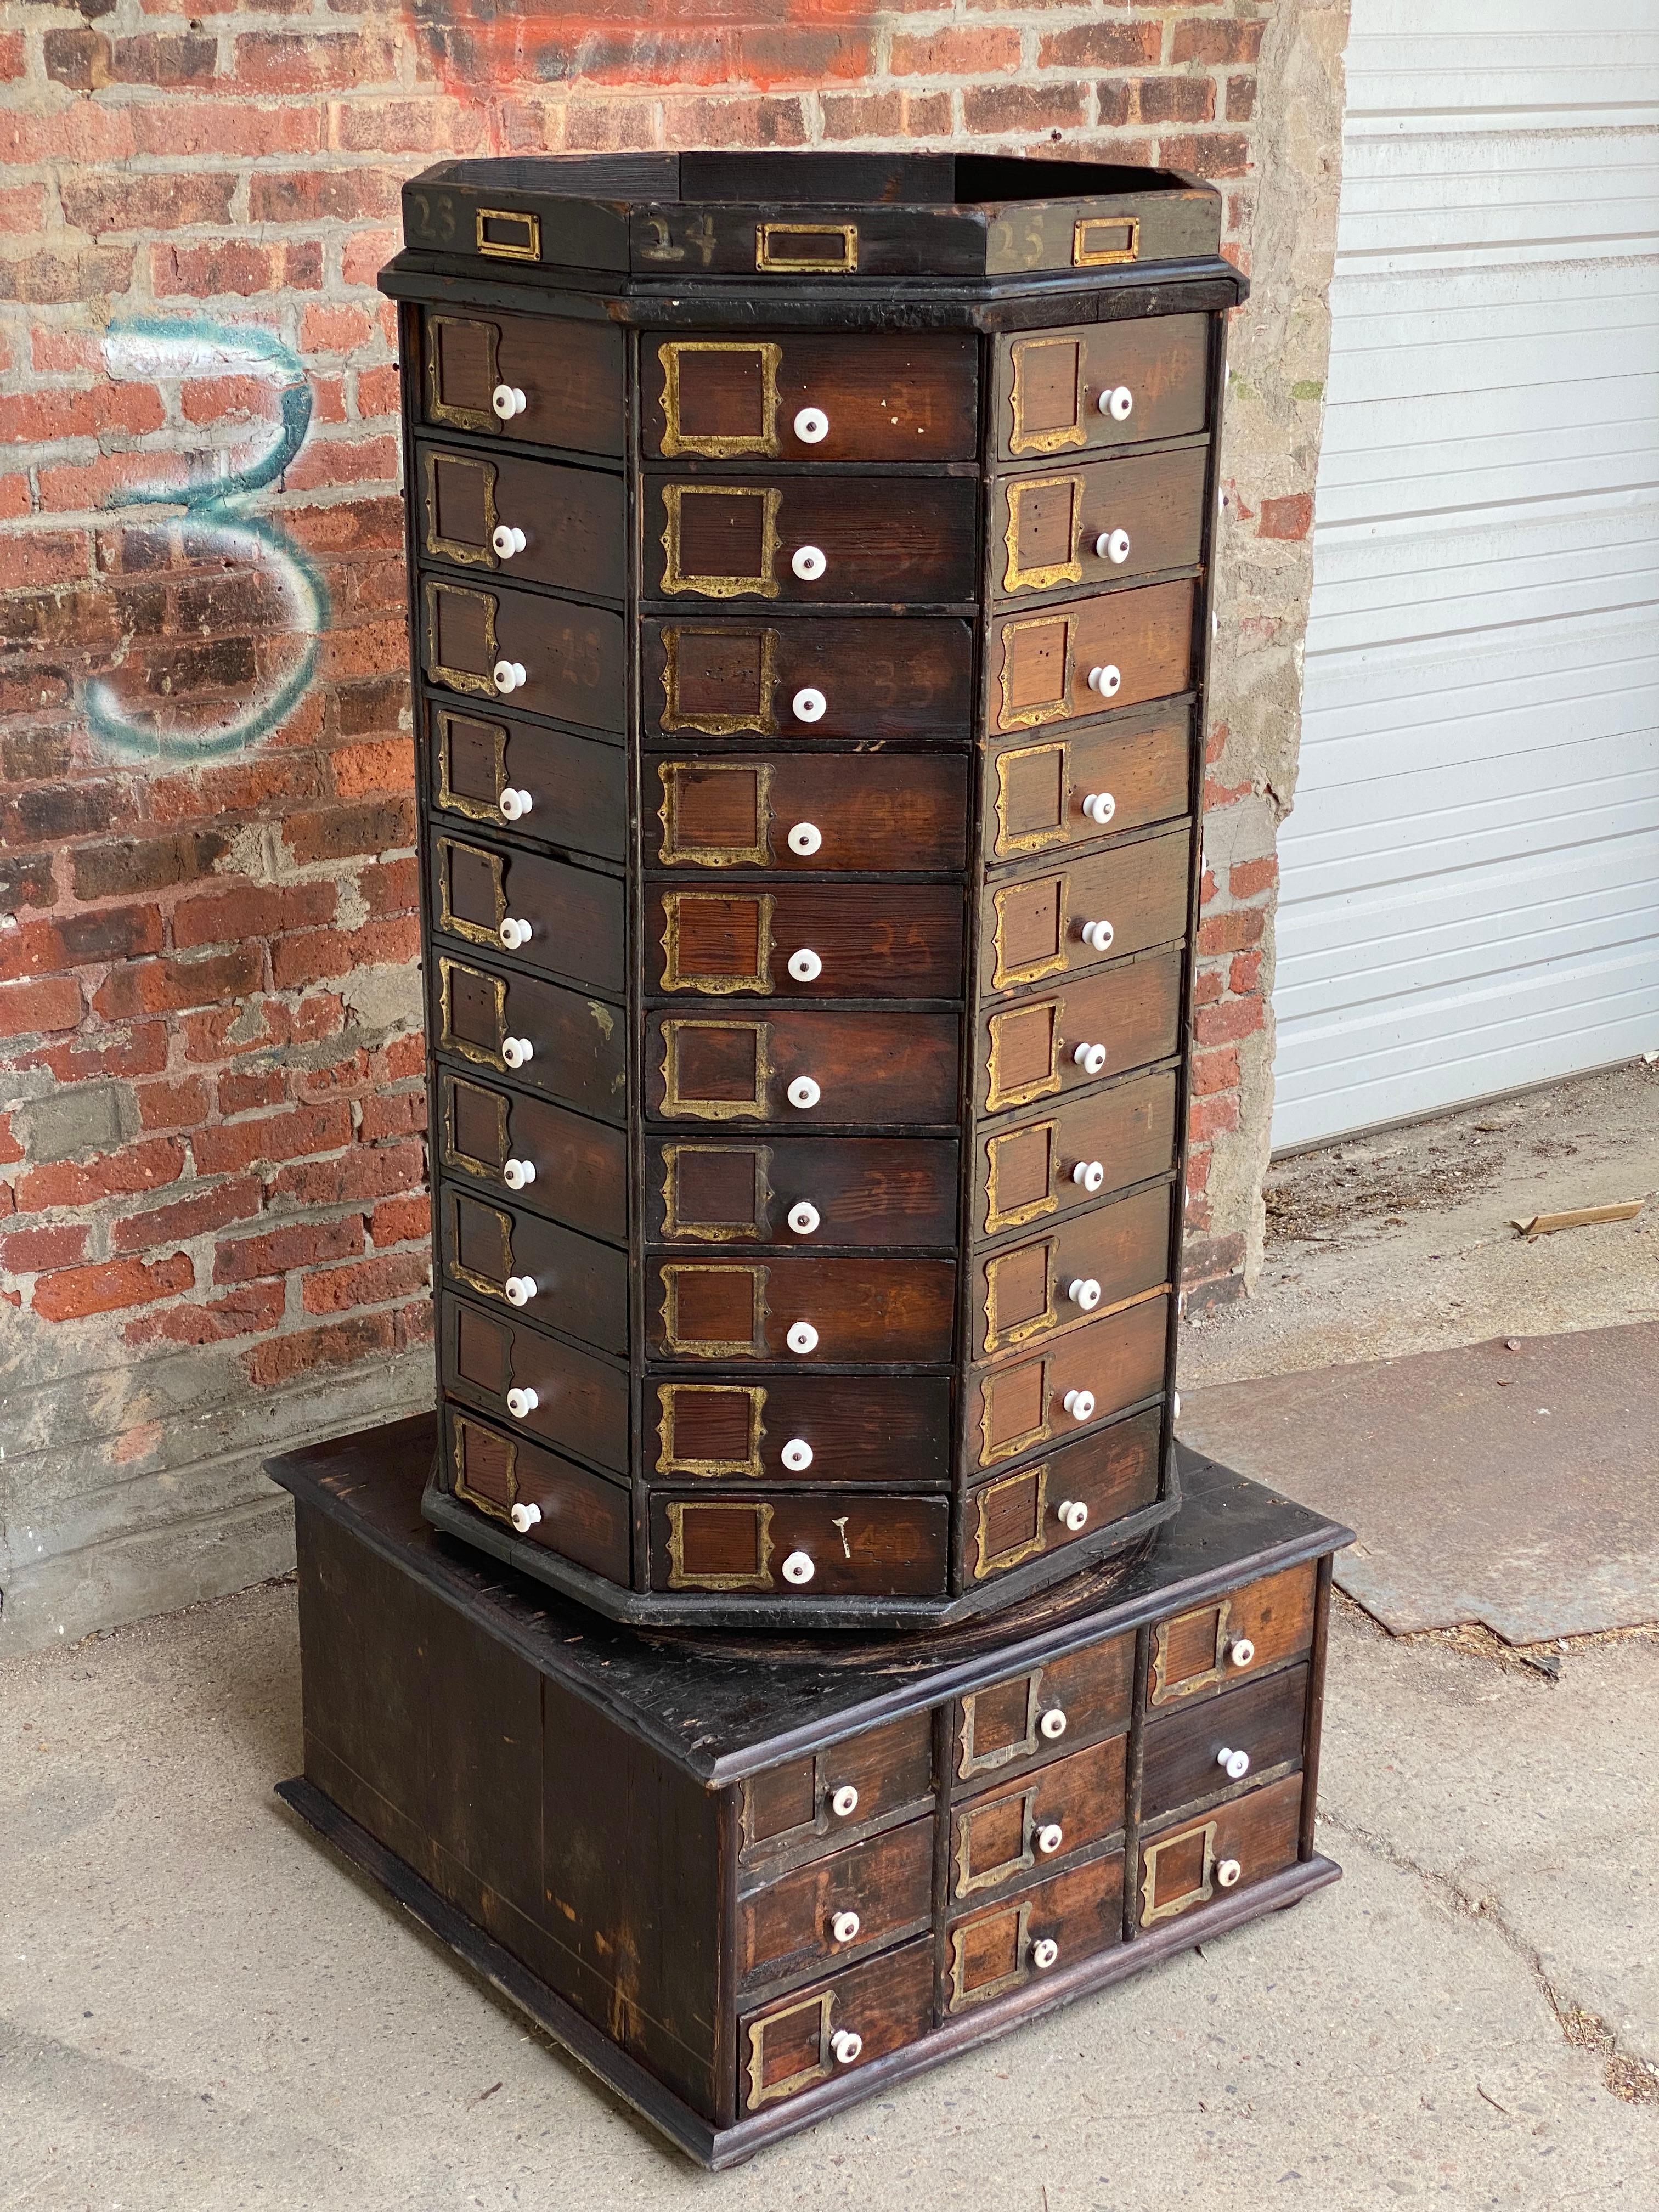 Circa Late Victorian era 98 drawer revolving hardware store cabinet. The spinning octagonal top holds 80 wedge shaped drawers with white porcelain knobs and scalloped edge metal label holders. The base has 18 rectangular shaped drawers, also with